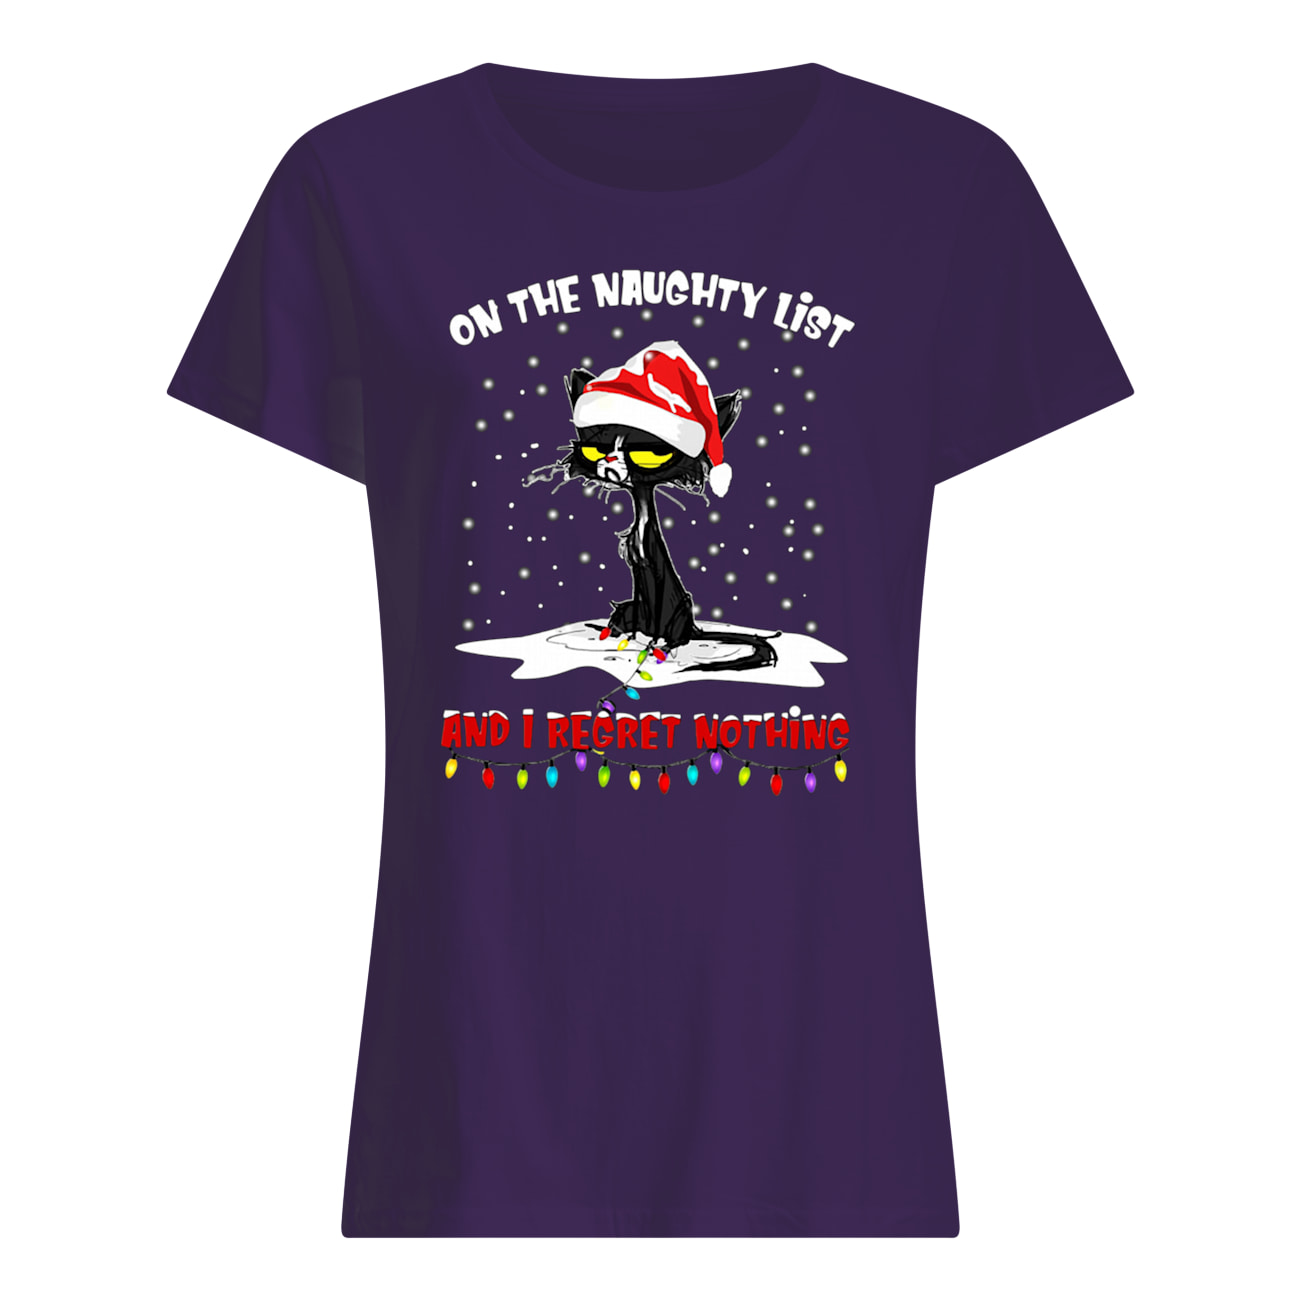 Black cats on the naughty list and i regret nothing christmas womens shirt